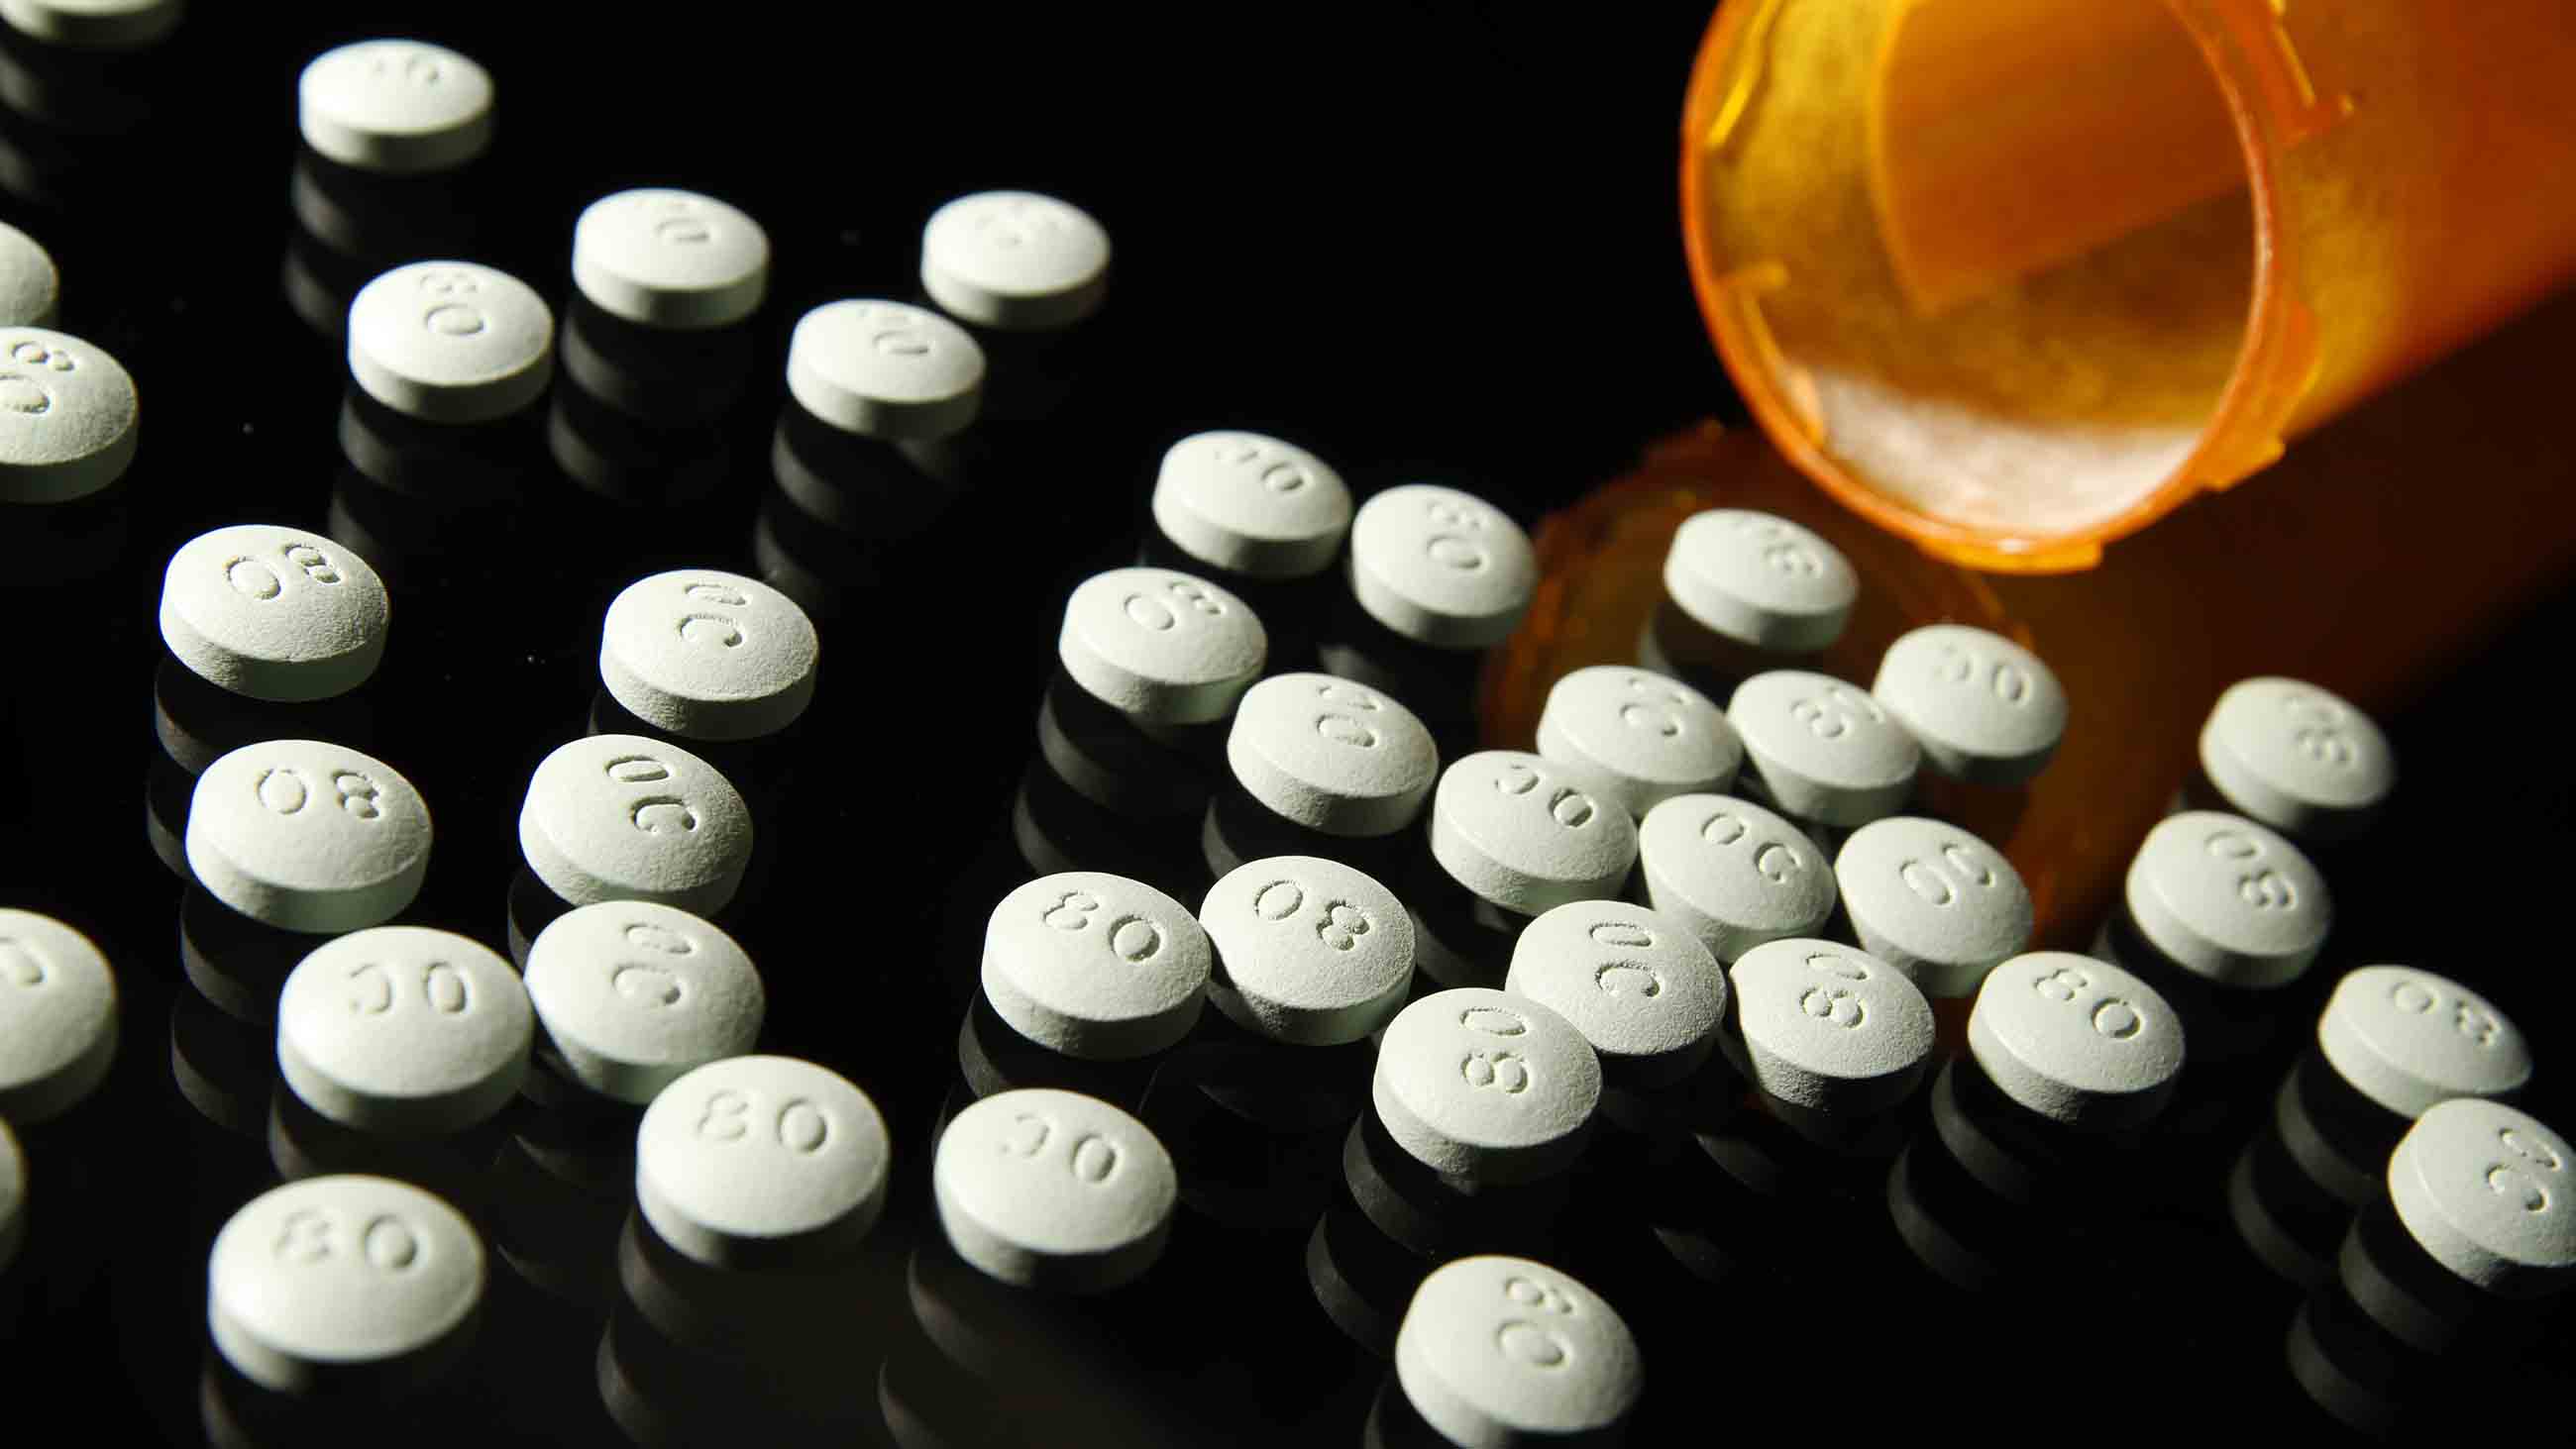 Purdue Pharma is facing an investigation over the marketing of its opioid painkiller OxyContin.